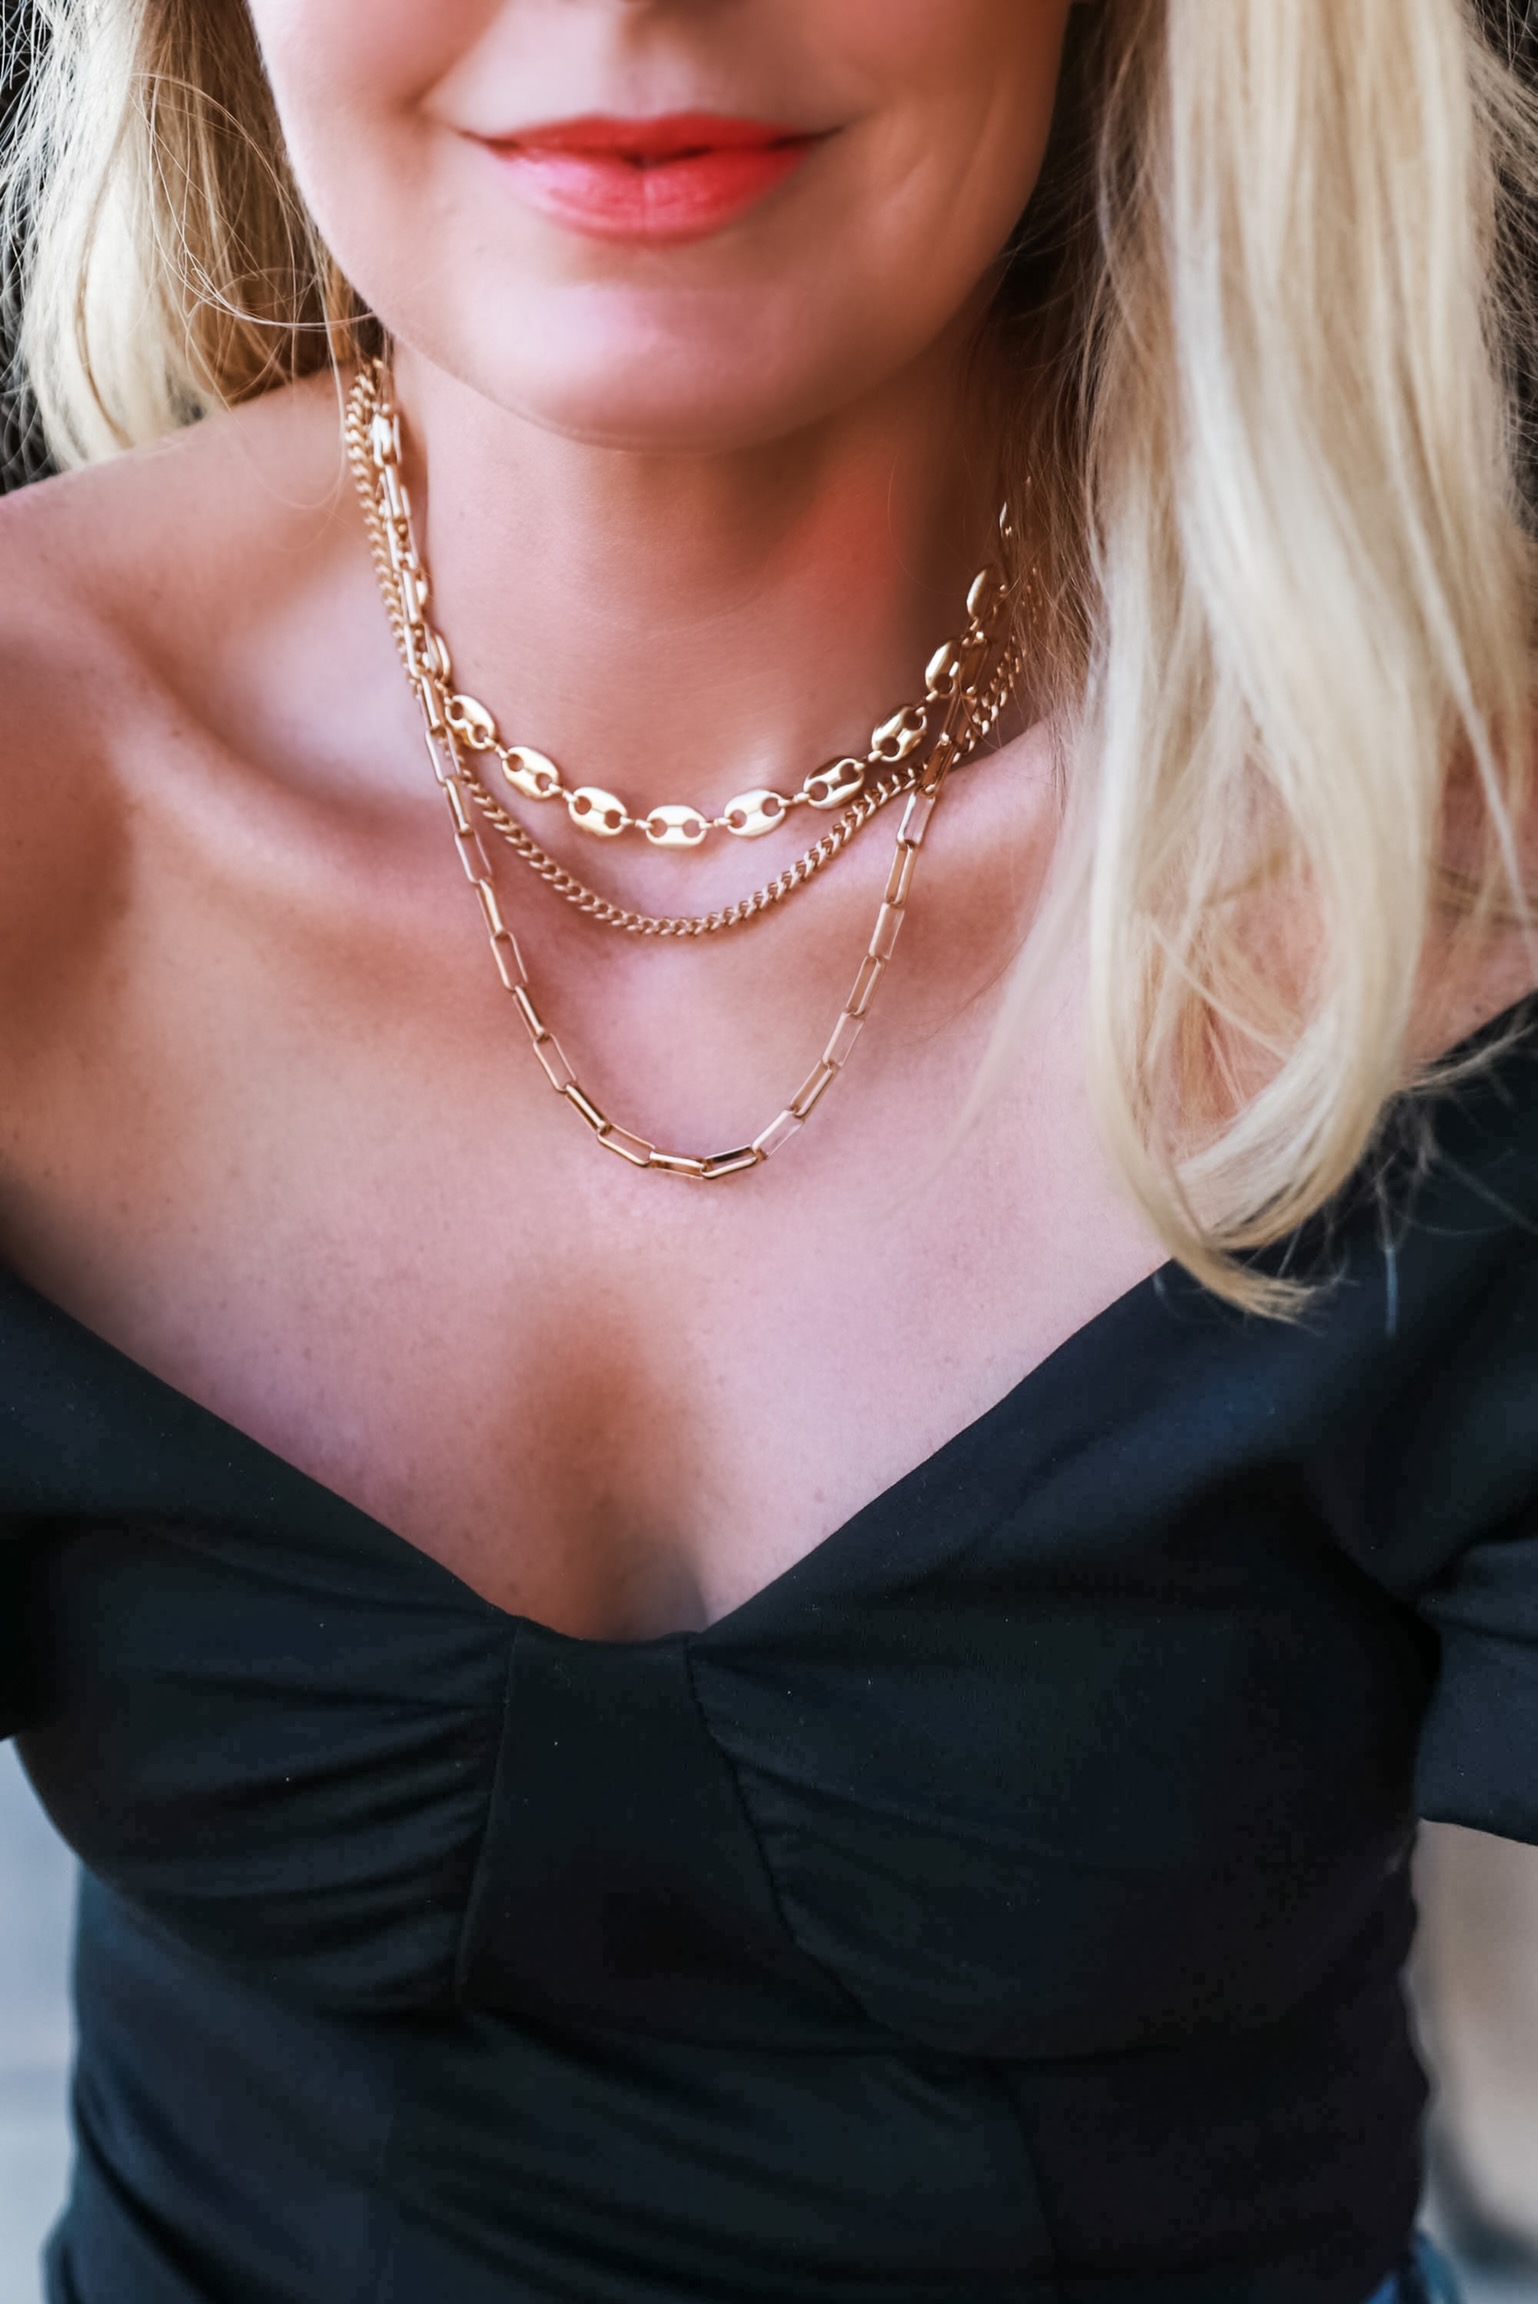 Express shiny gold layered three chain necklace